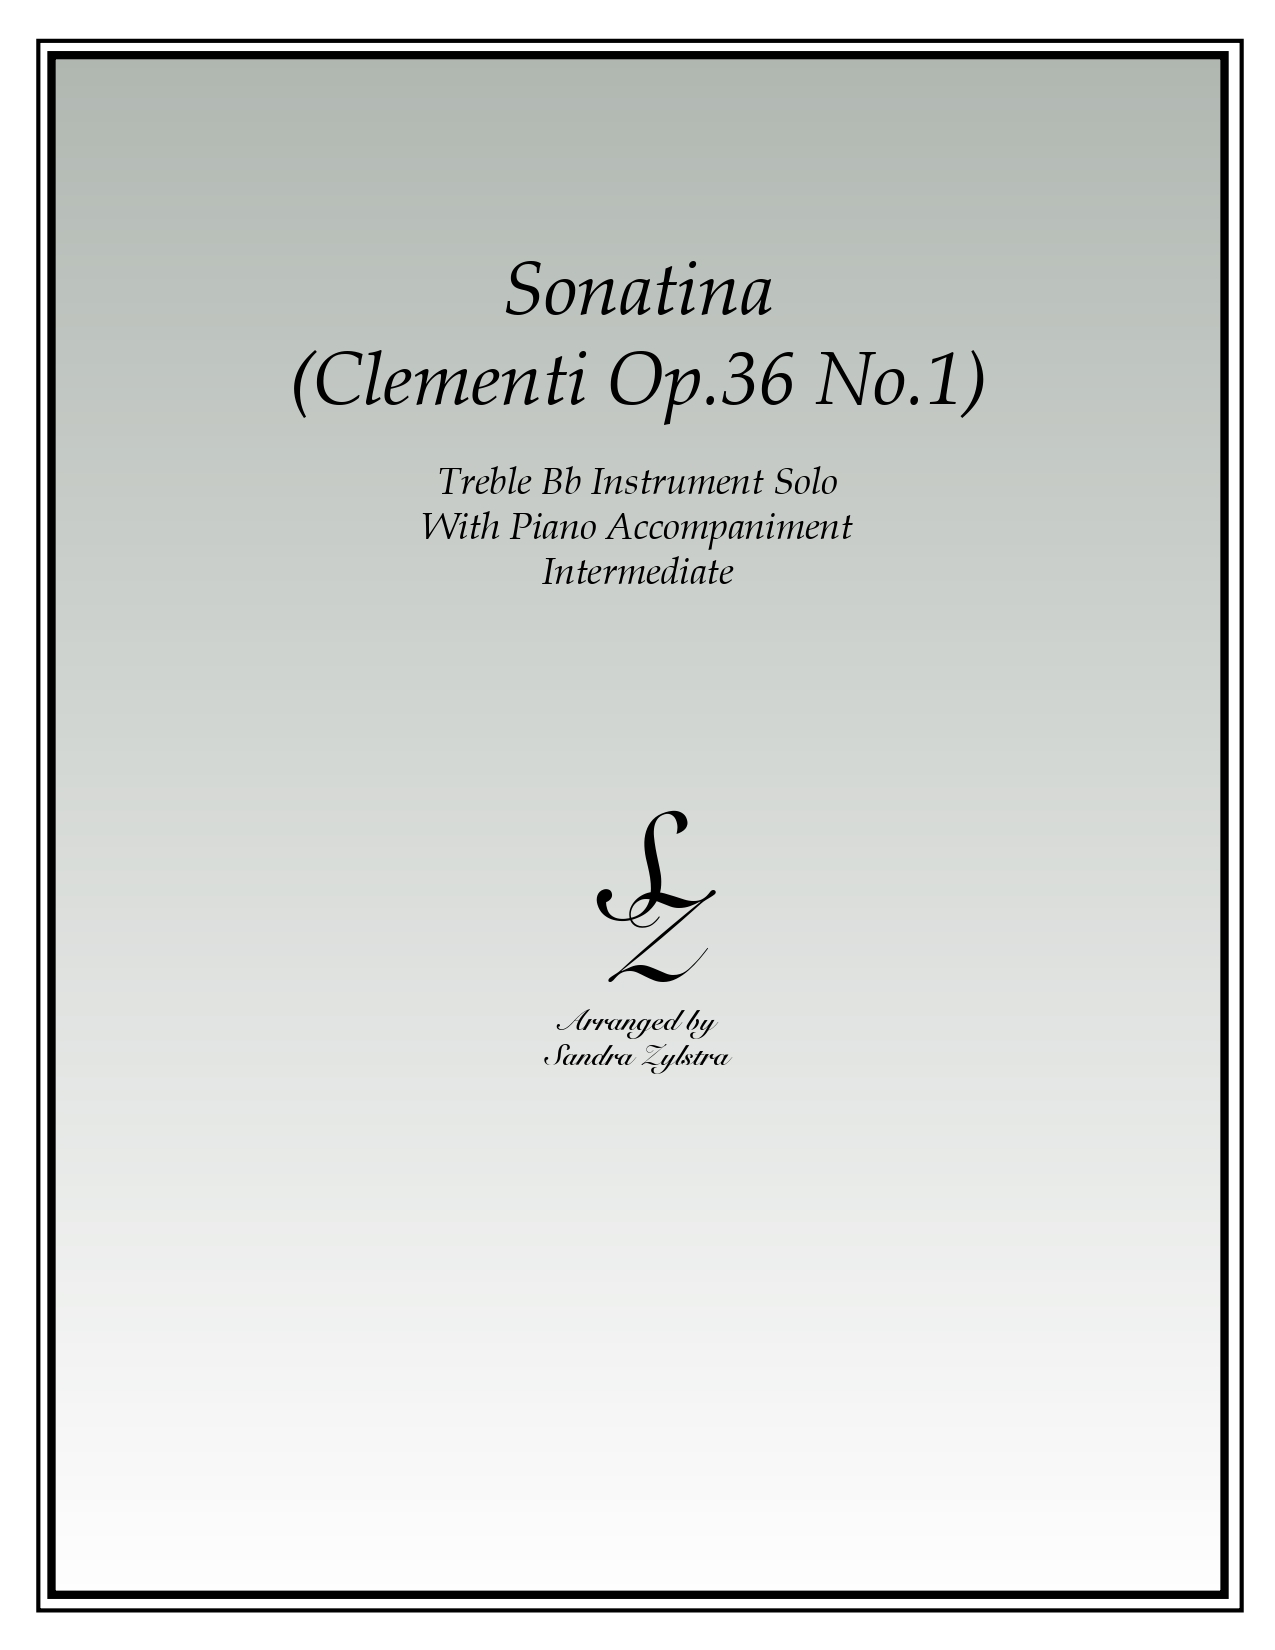 Sonatina Clementi Op. 36 No. 1 Bb instrument solo part cover page 00011